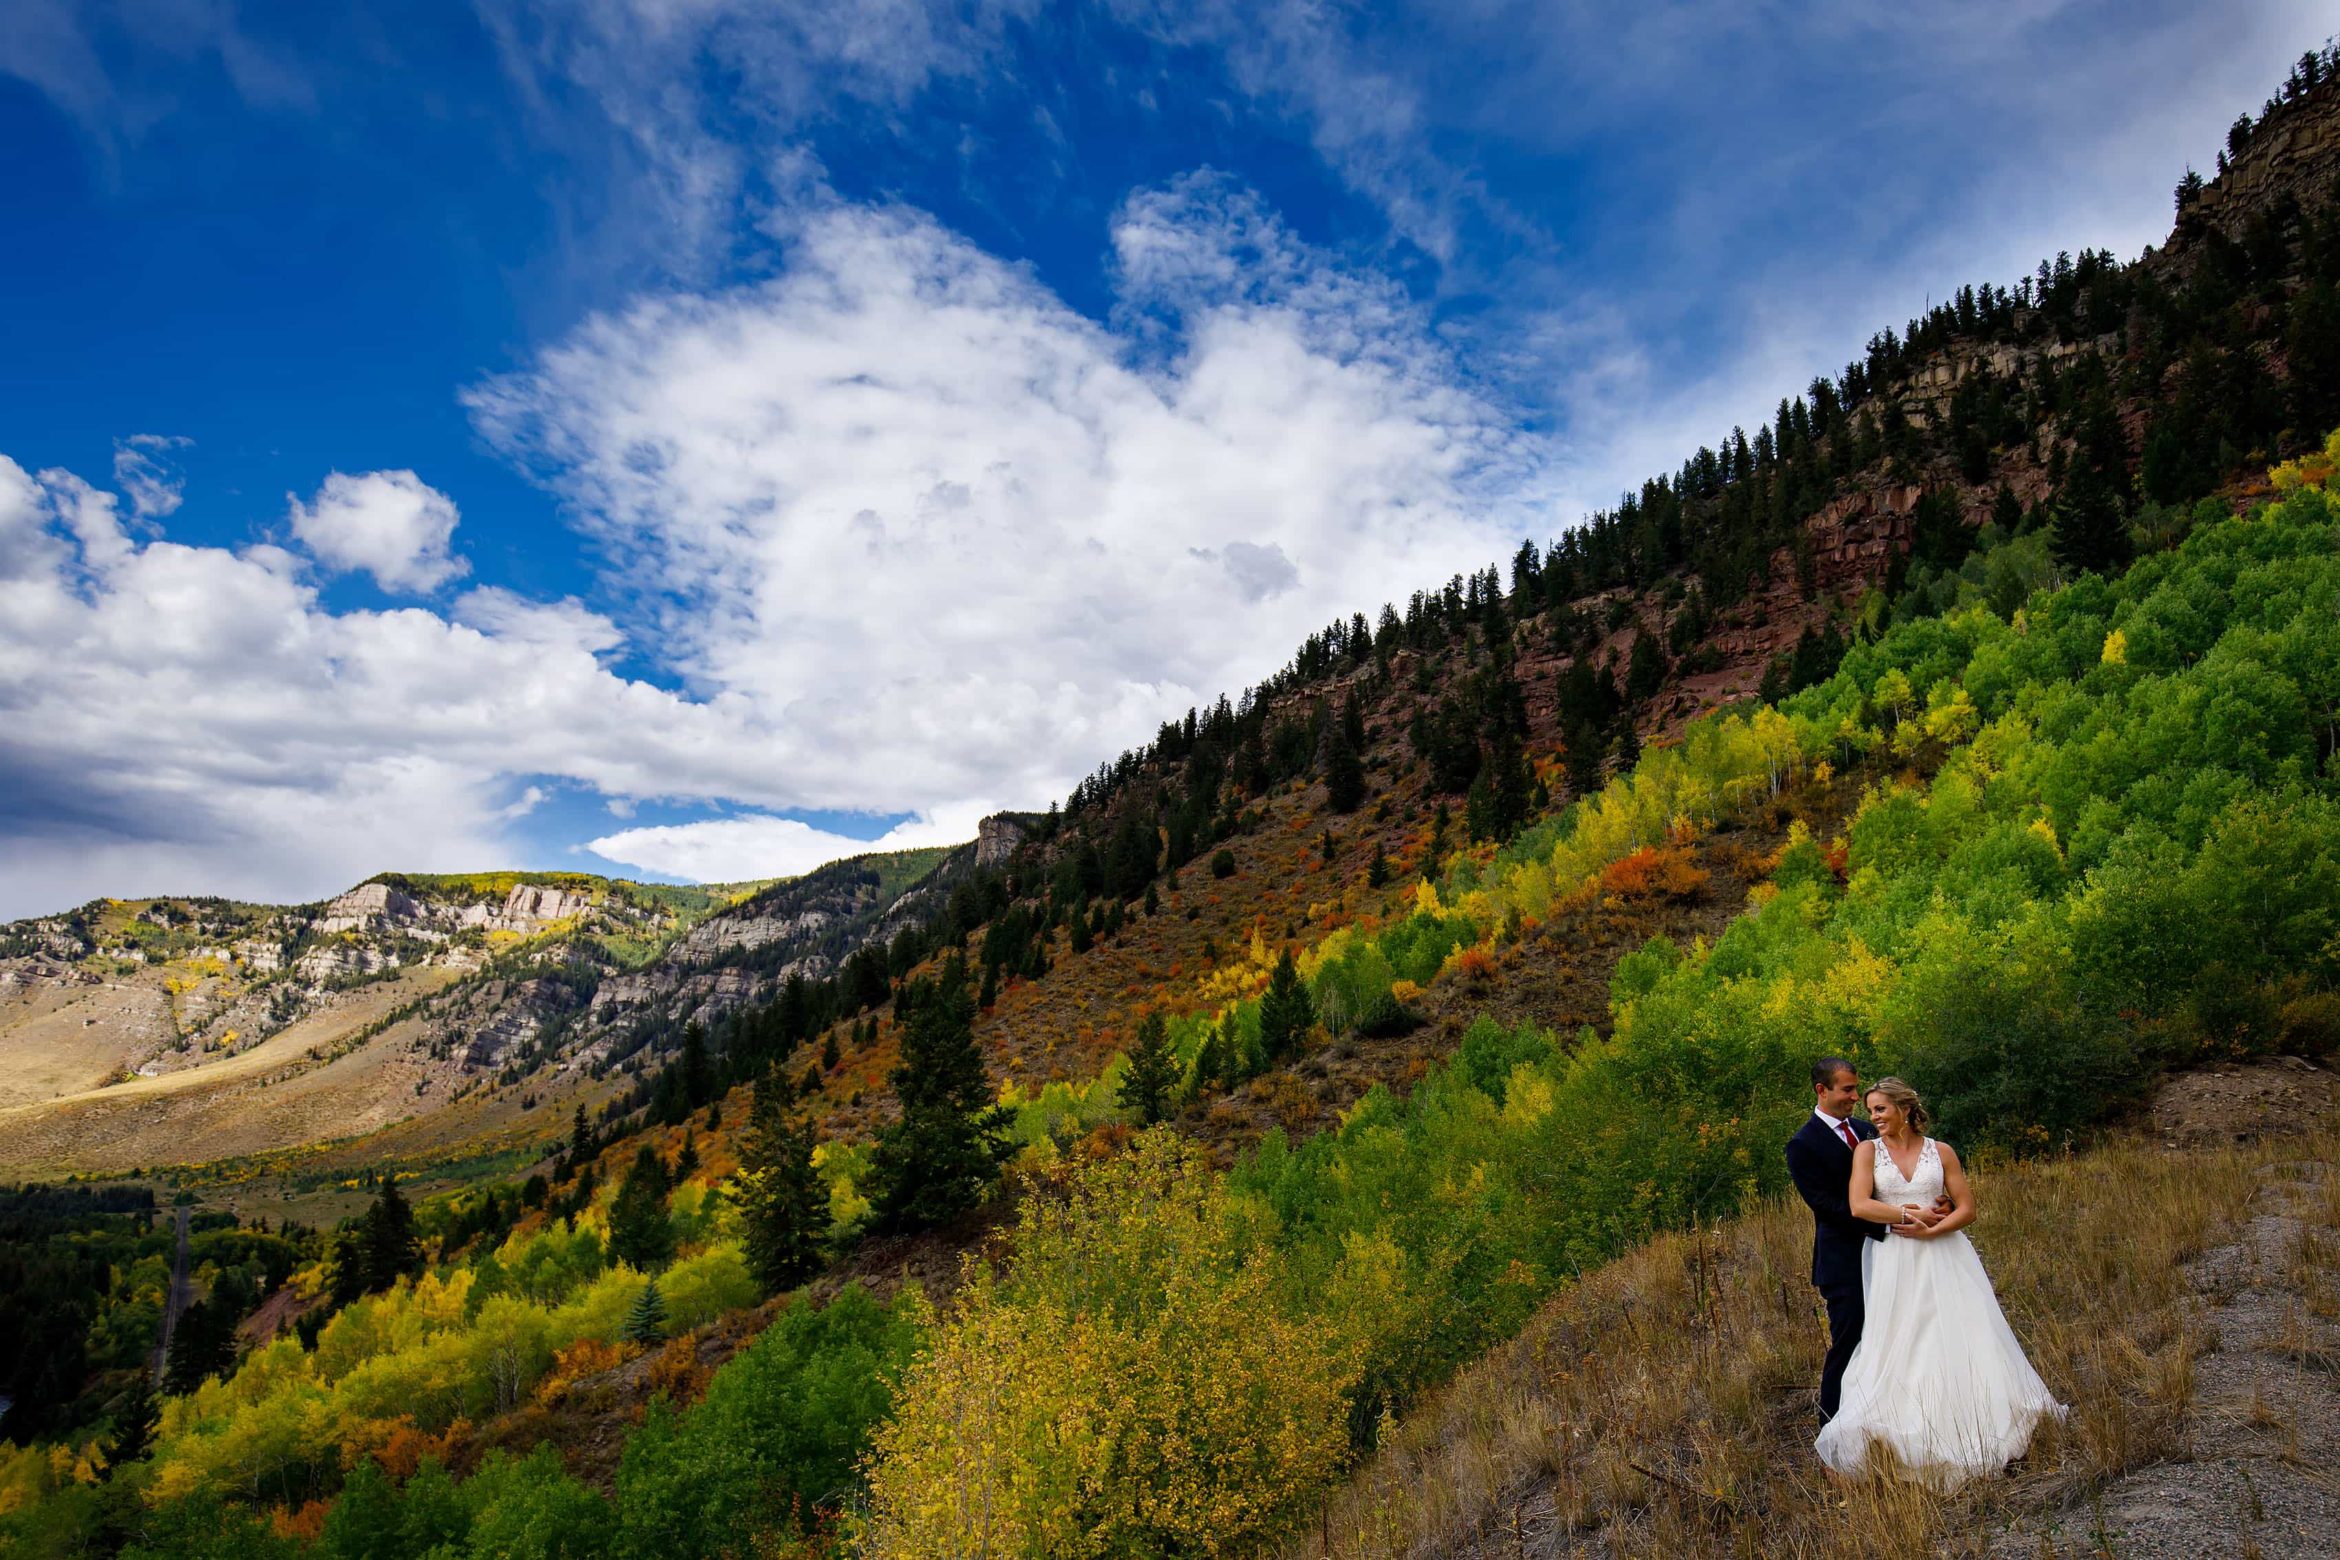 A couple embrace along the 10th mountain division memorial highway near a grove of colorful aspen trees in the fall during their Camp Hale wedding